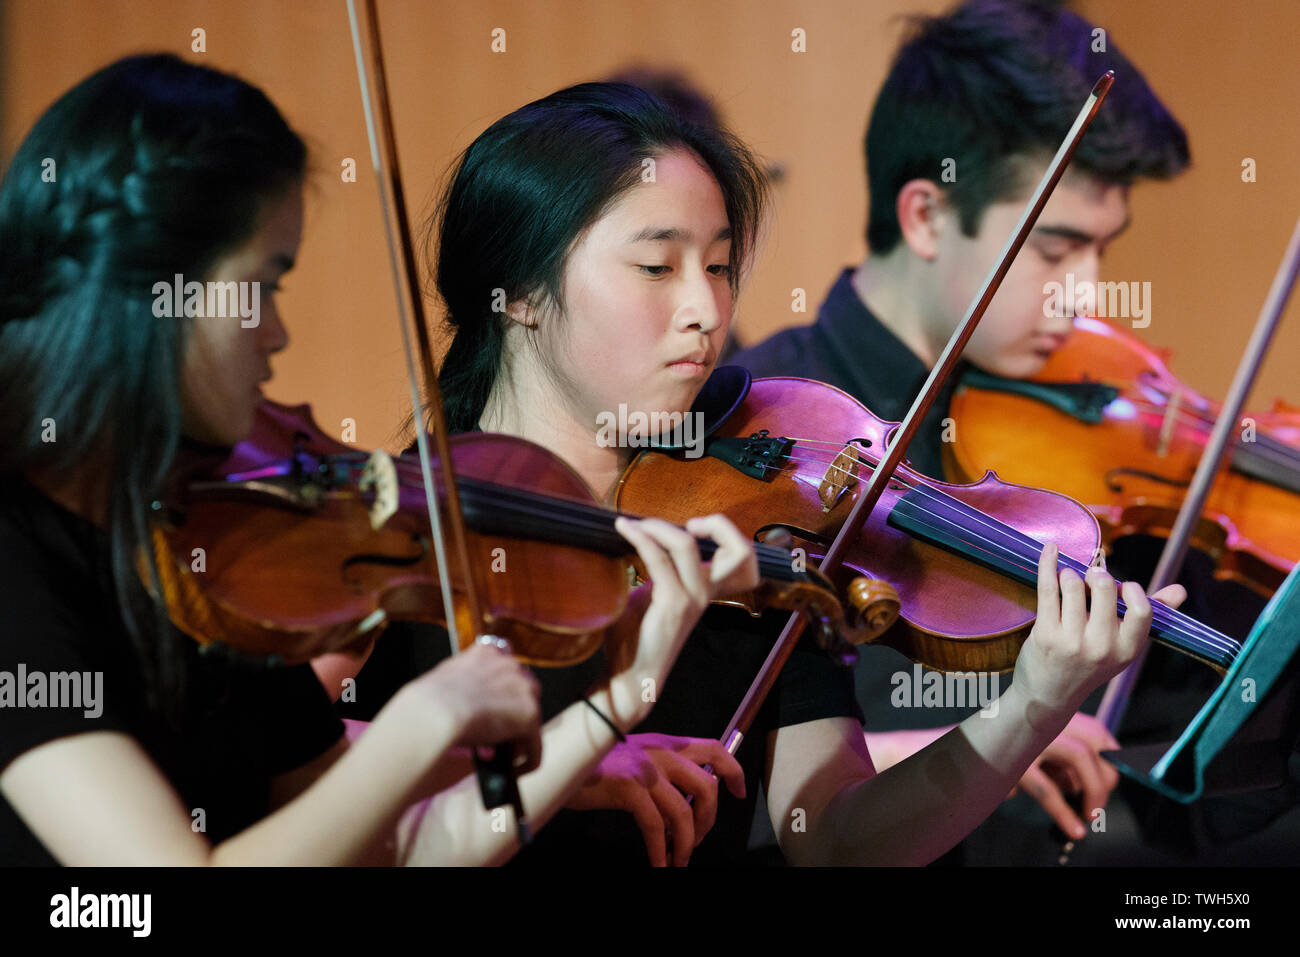 American High School Symphony Orchestra, female violinist Stock Photo